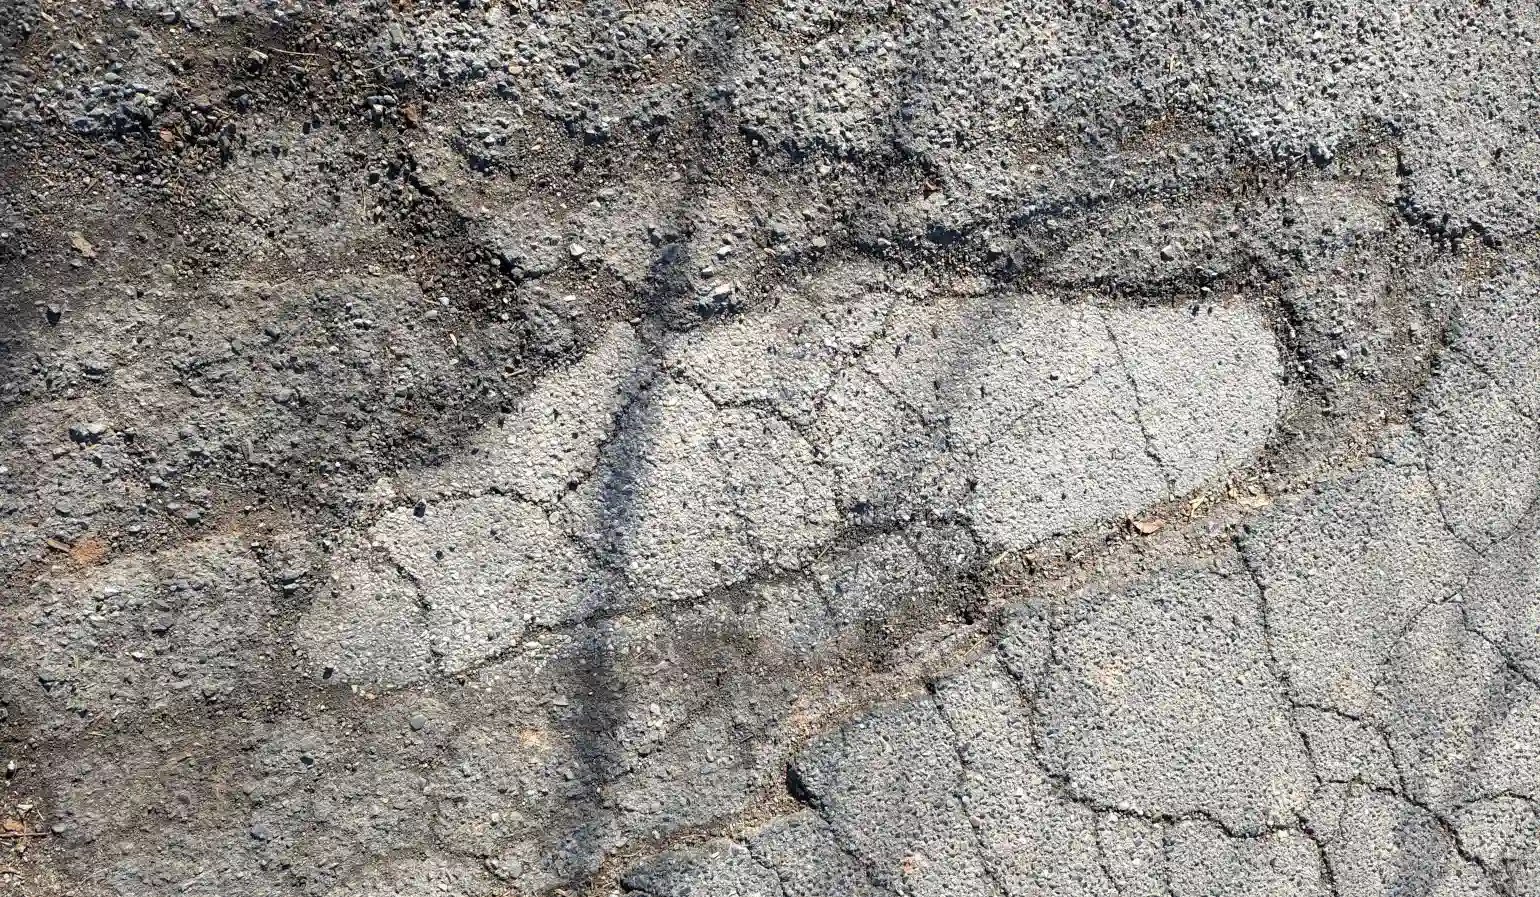 Photograph of several layers of blacktop road with cracks and shadows